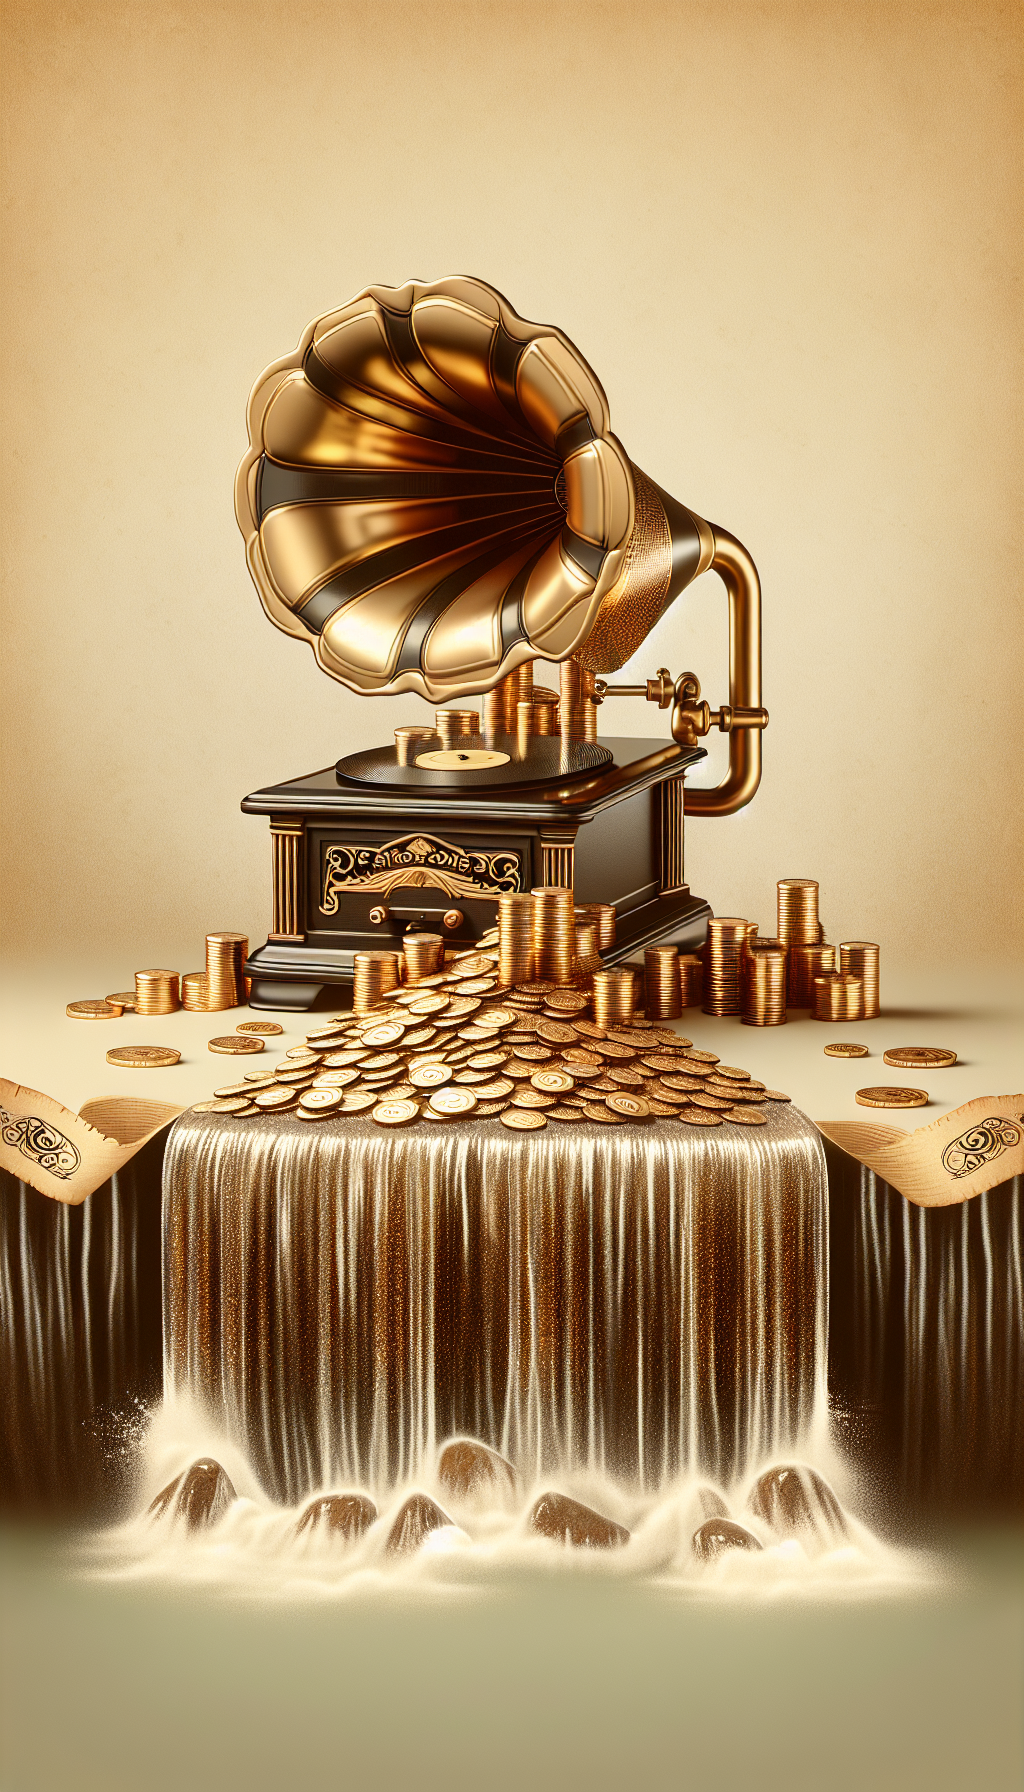 A vintage Victrola record player sits atop a cascade of shimmering gold coins, replacing the turntable with an elegant appraisal magnifying glass that reflects a nostalgic memory in sepia tones. Delicately intertwined around the Victrola, a stylized parchment ribbon unfurls, inscribed with the words "Nostalgia to Net Worth."